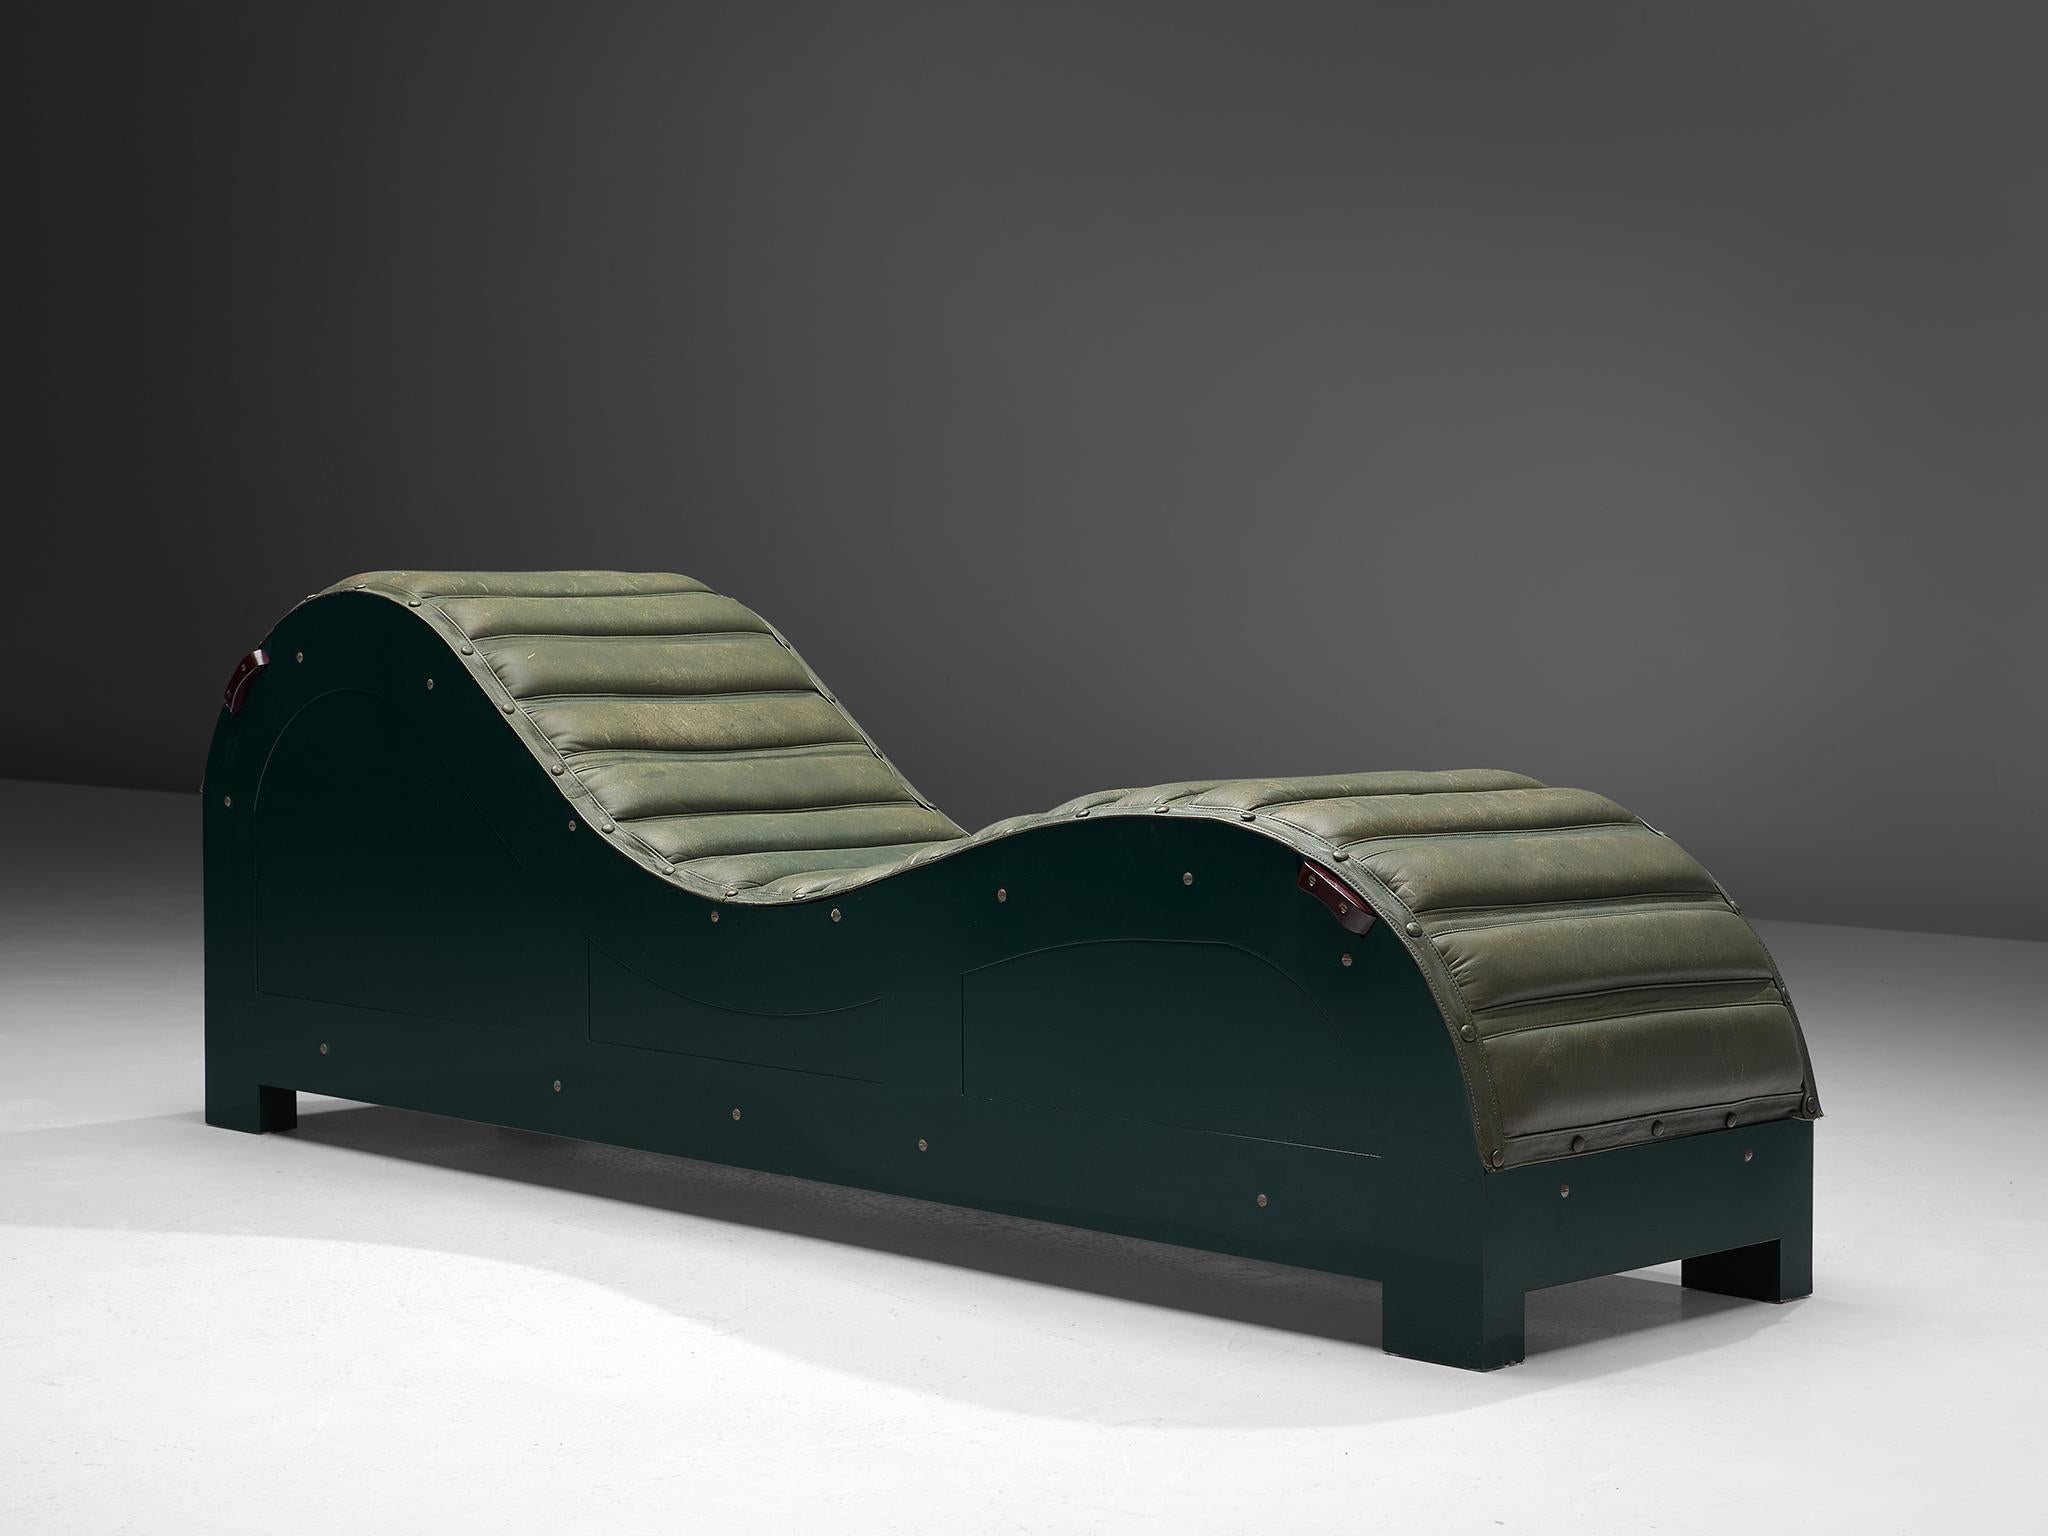 Mats Theselius for Källemo, chaise longue, in steel and leather, Sweden 1992.

Limited edition daybed, number 8 out of 50. This chaise was designed by Mats Theselius. It consist of a steel frame with car-enamel finish in green. The seating is